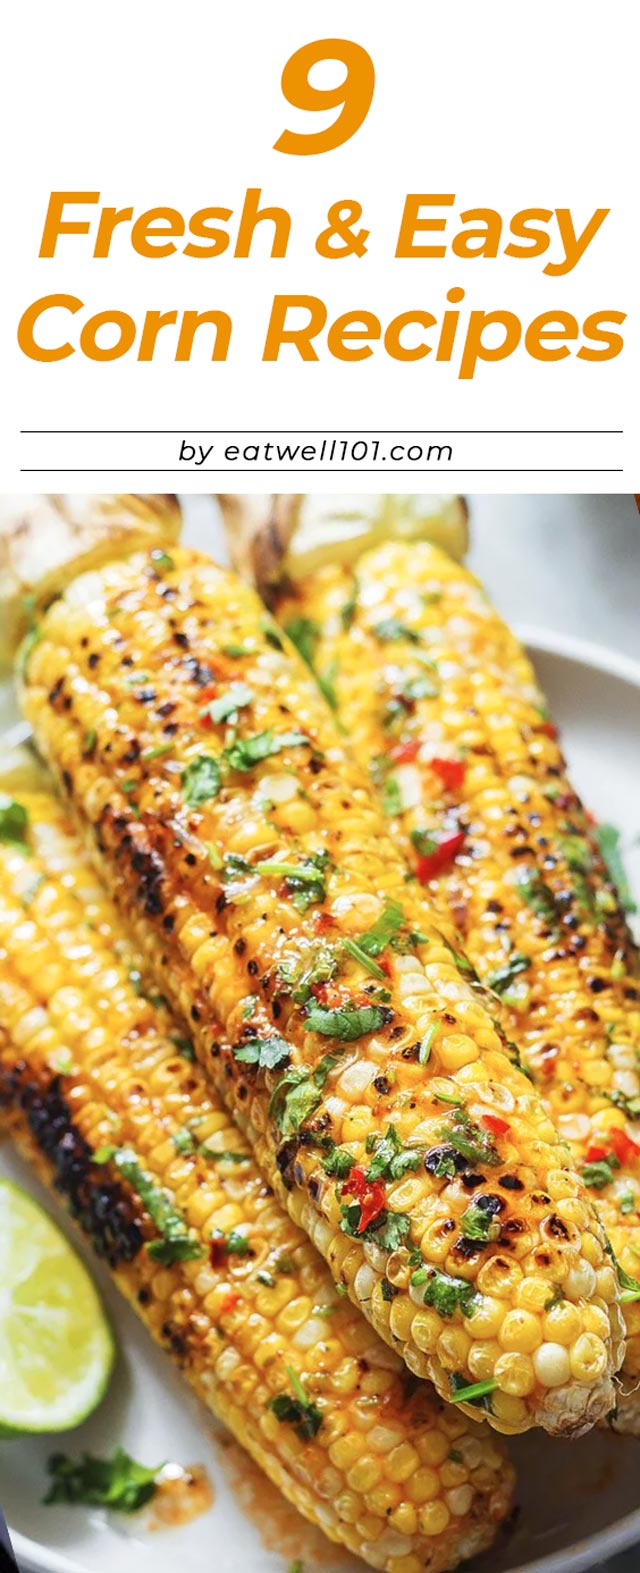 9 Fresh and Easy Corn Recipes You'll Want to Try ASAP - #corn #recipes #eatwell101 - Enjoy our best easy corn recipes for making this seasonal vegetable taste incredible! 